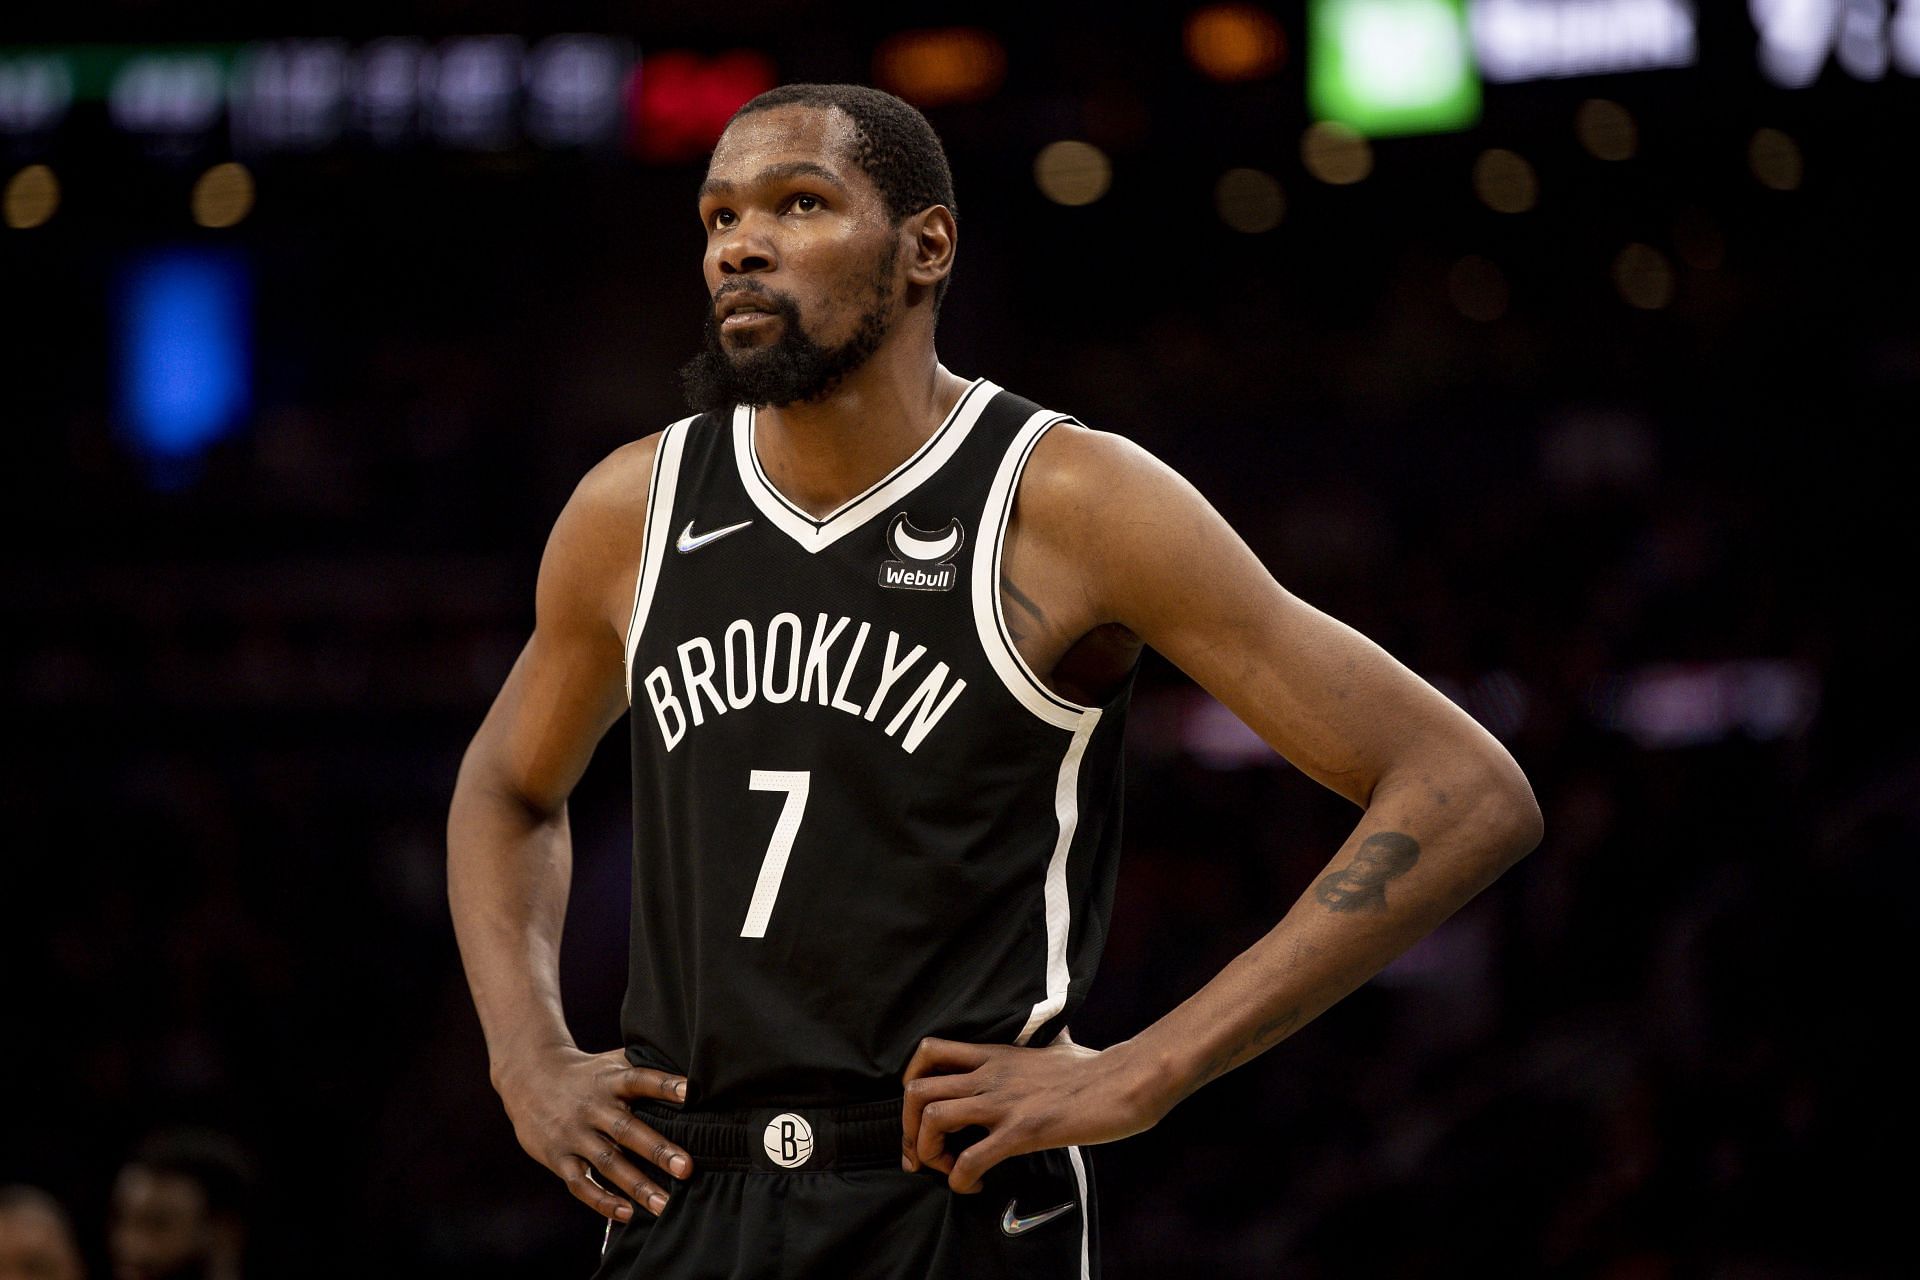 Kevin Durant #7 of the Brooklyn Nets looks on during a game against the Boston Celtics 